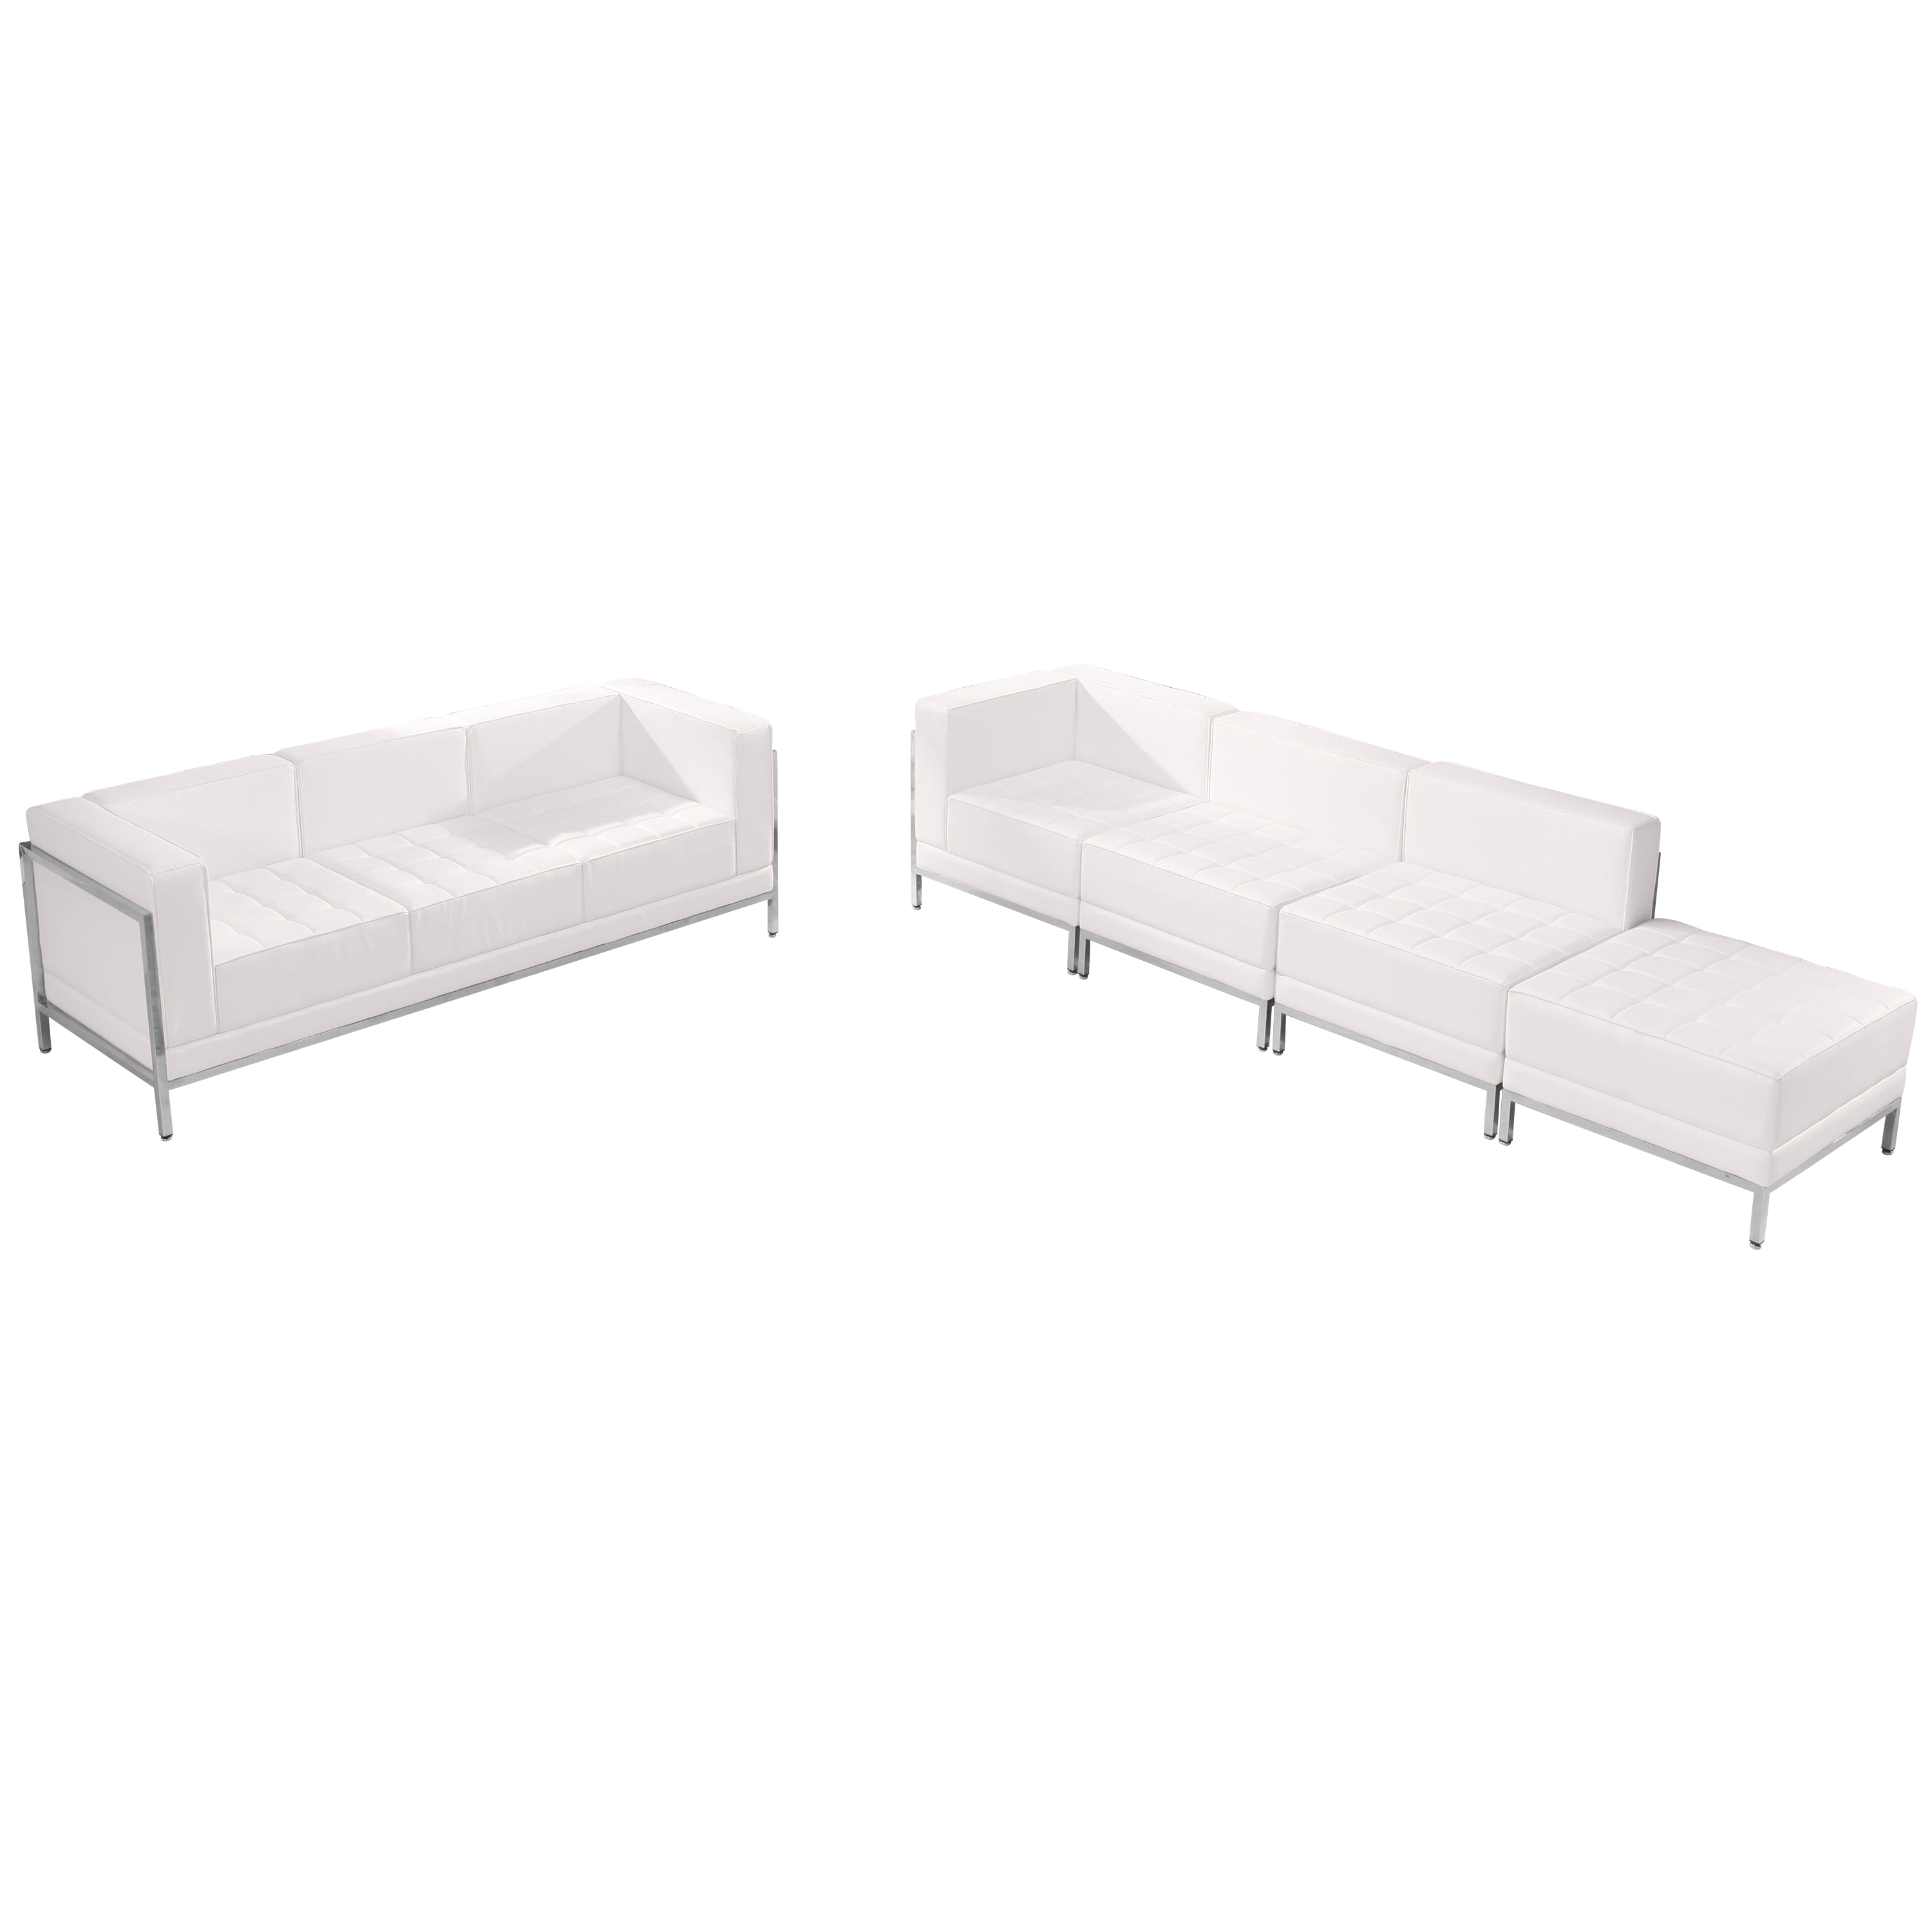 Flash Furniture ZB-IMAG-SET16-WH-GG Hercules Imagination Series White LeatherSoft Sofa & Lounge Chair Set, 5 Pieces